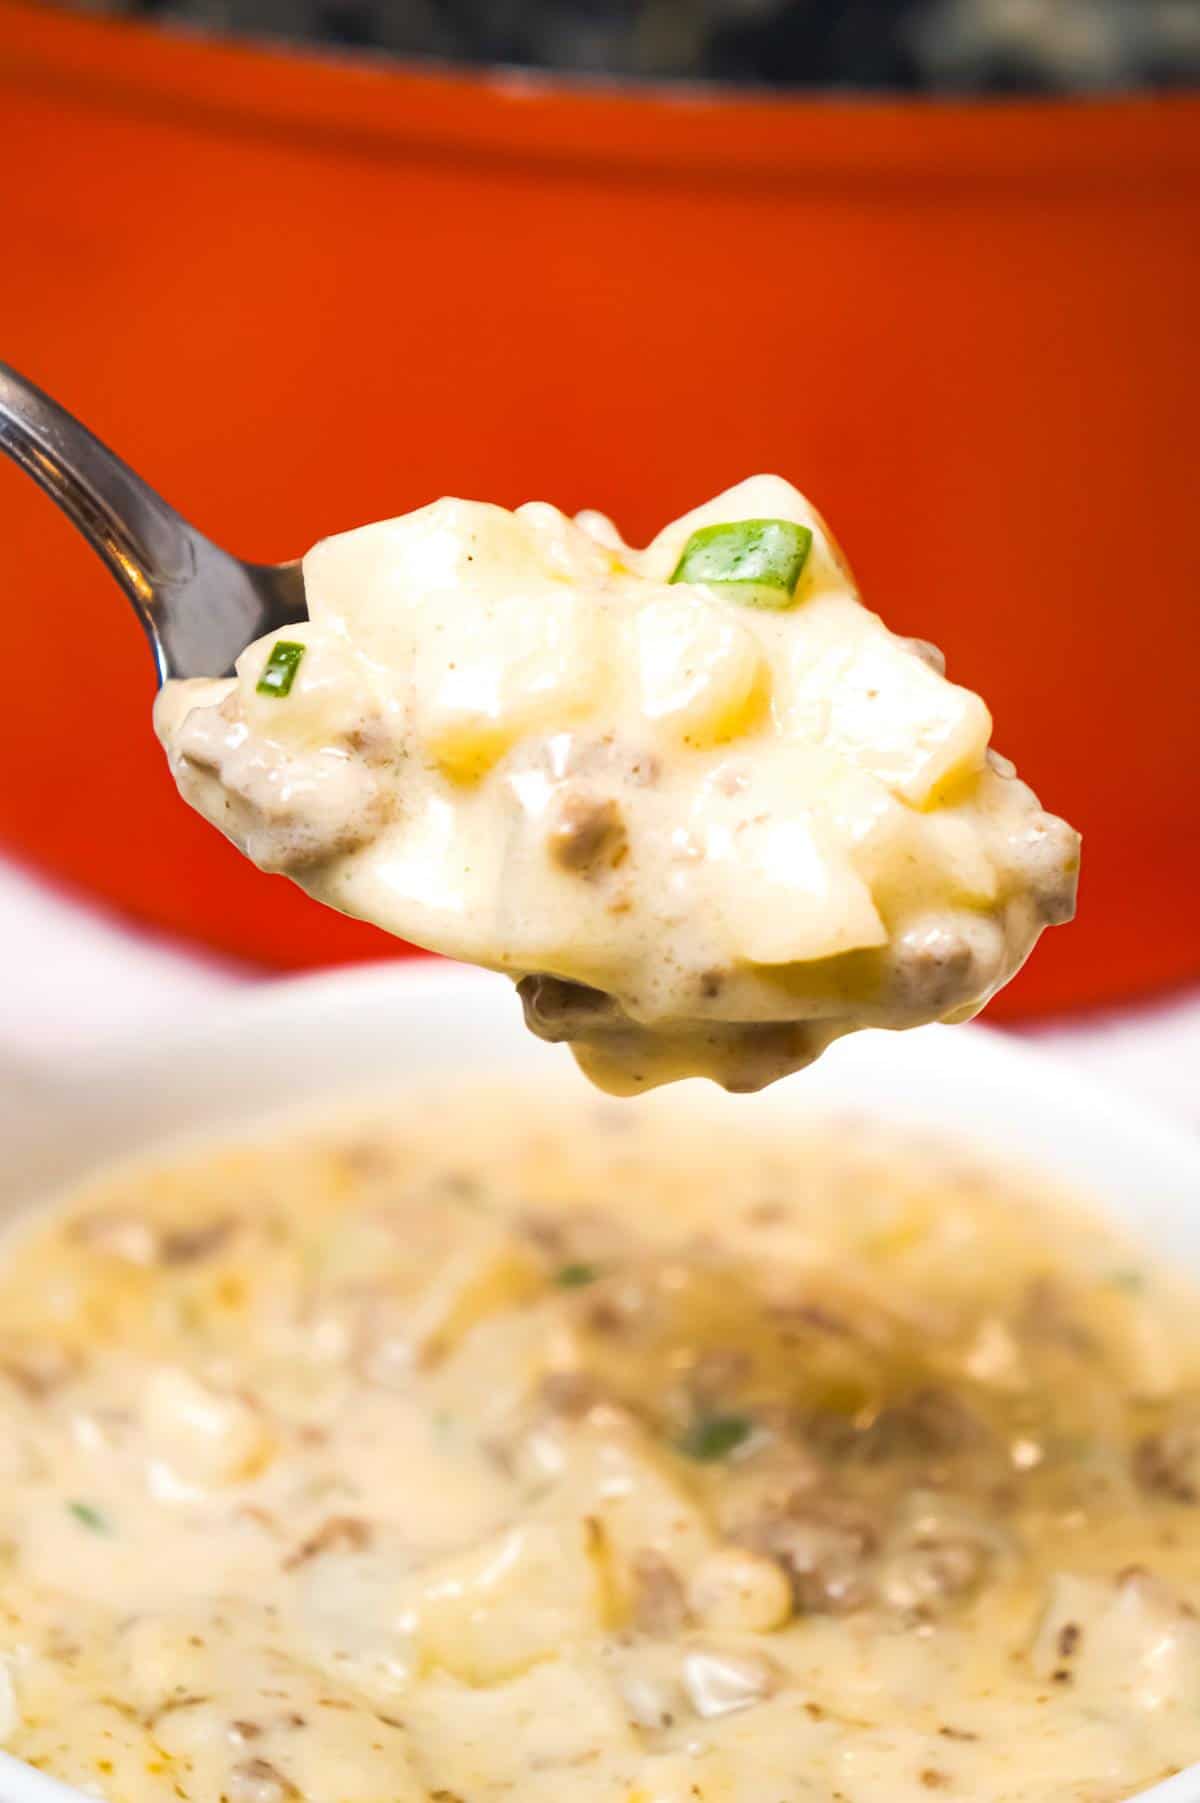 Cheesy Hamburger Potato Soup is a hearty soup recipe loaded with ground beef, diced potatoes, chopped green onions and shredded cheddar cheese.